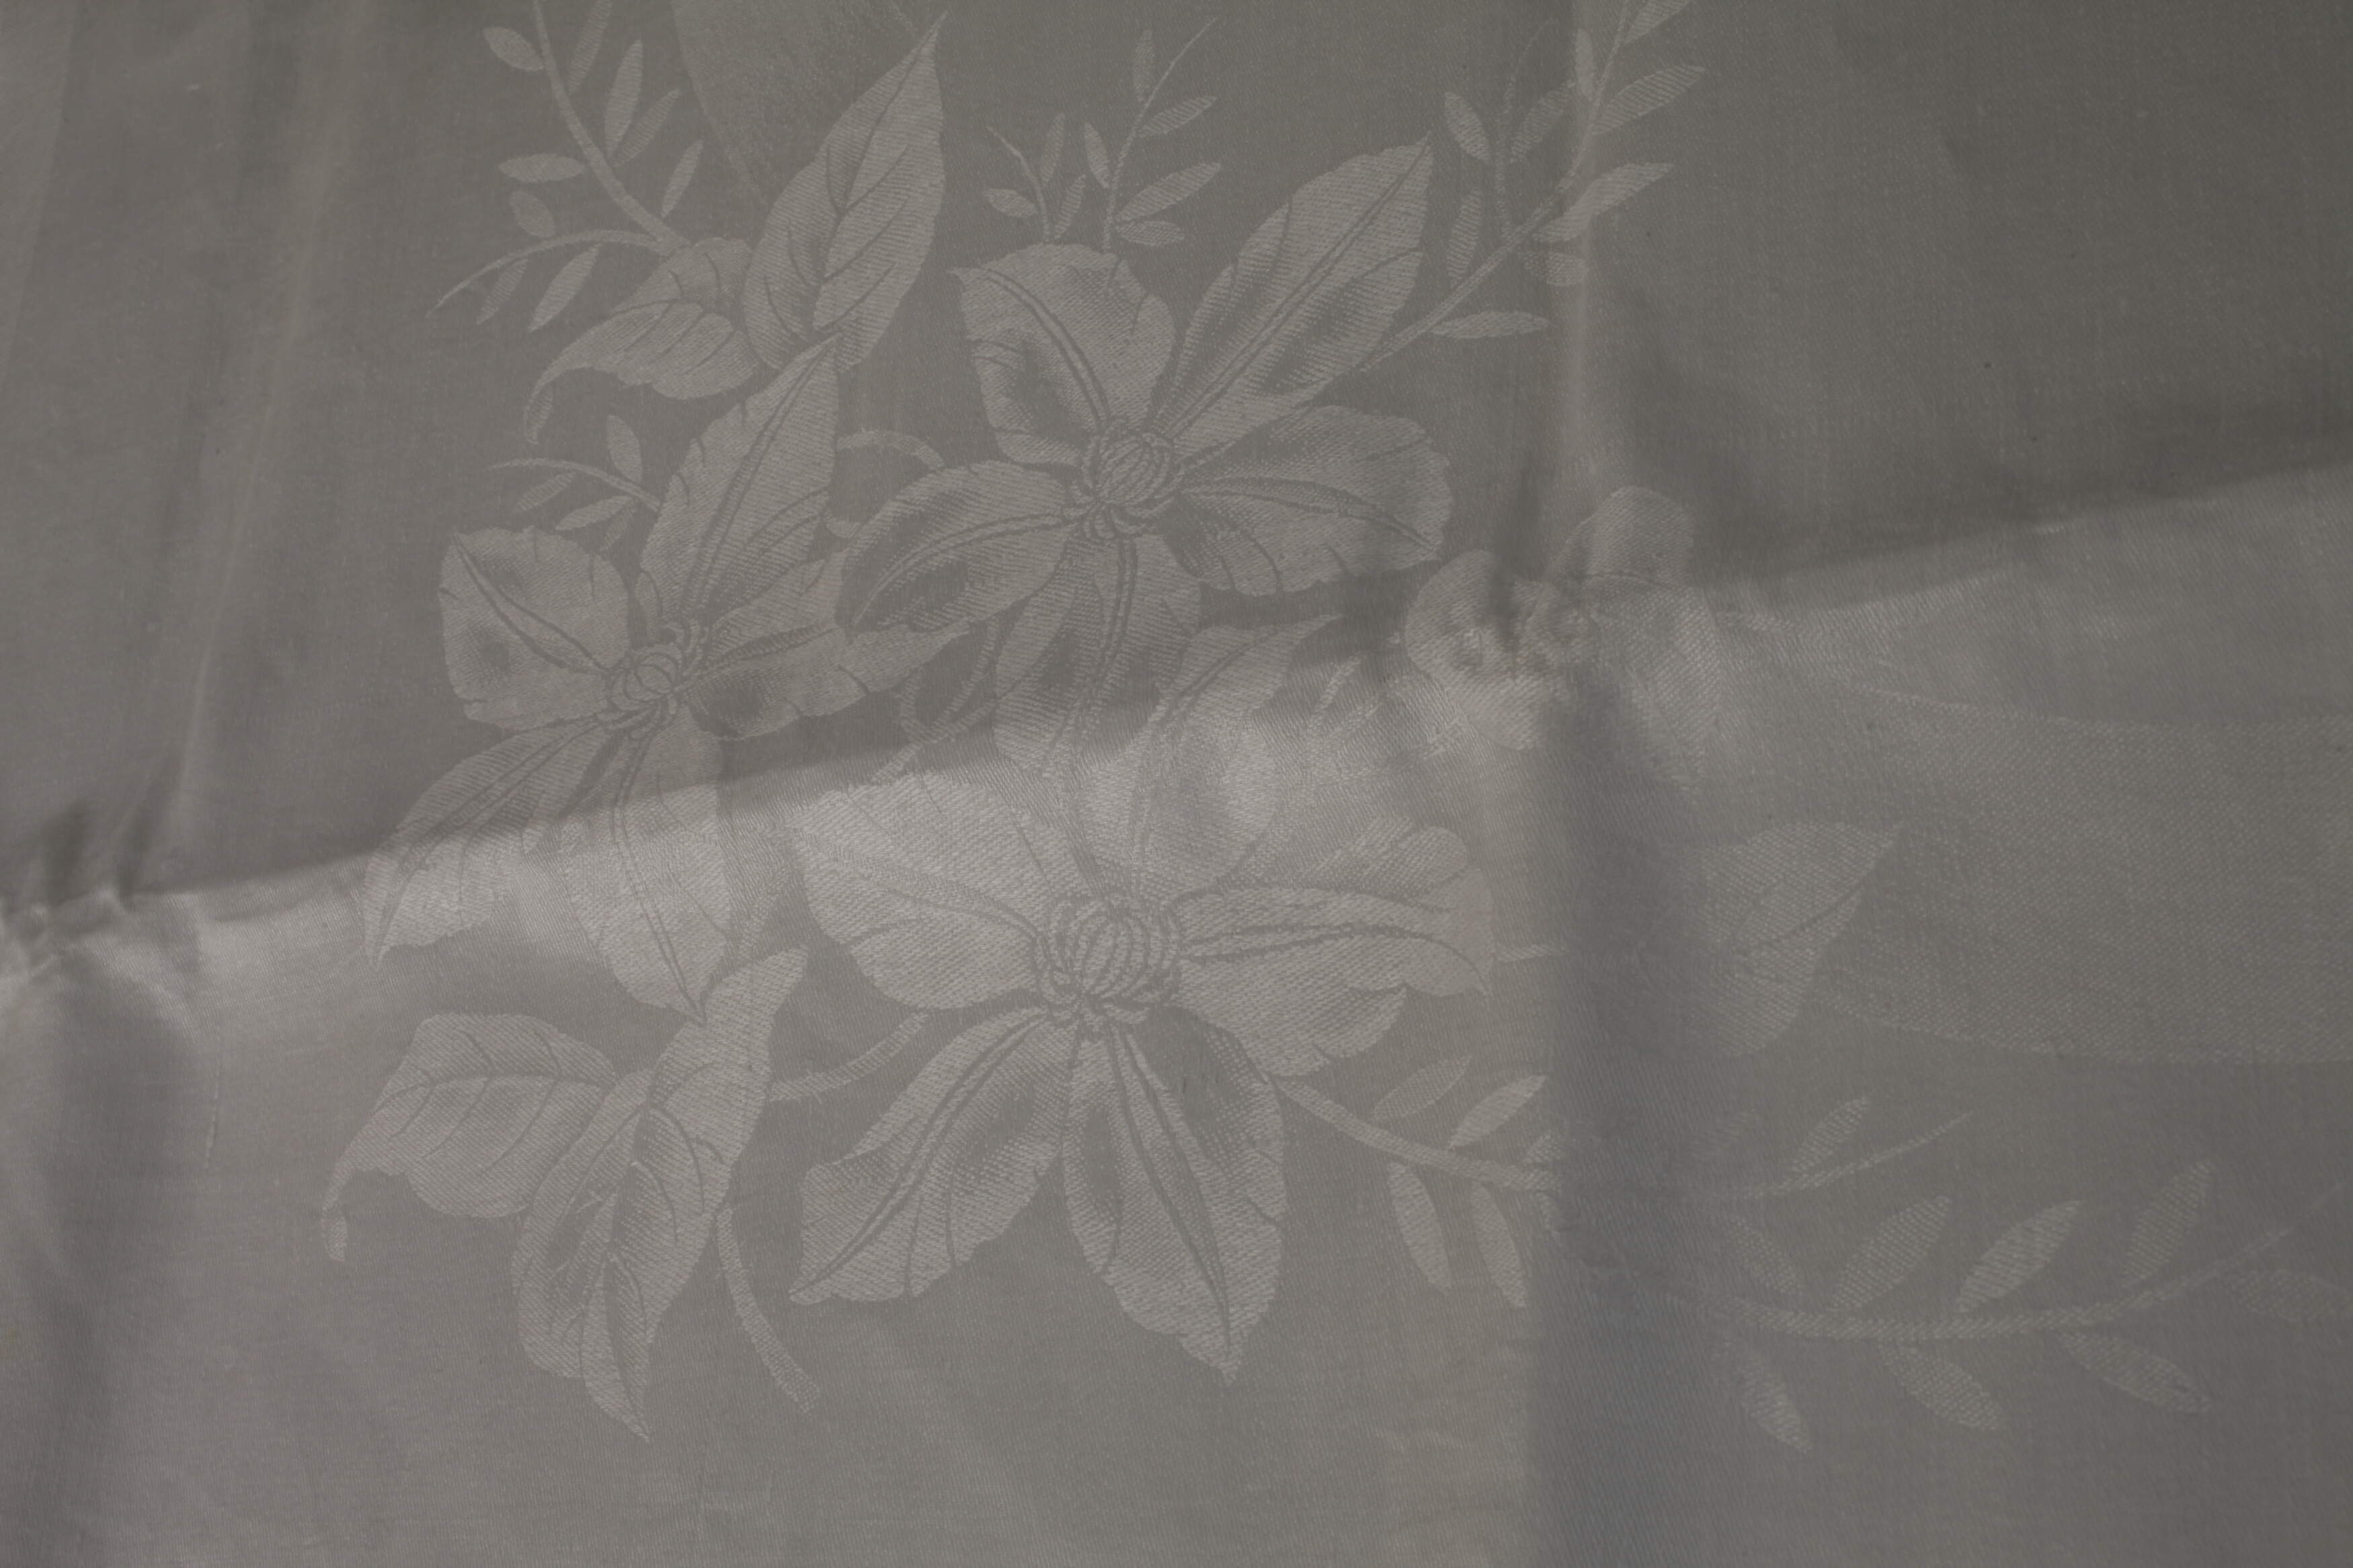 Tablecloth with floral decoration - Image 2 of 2